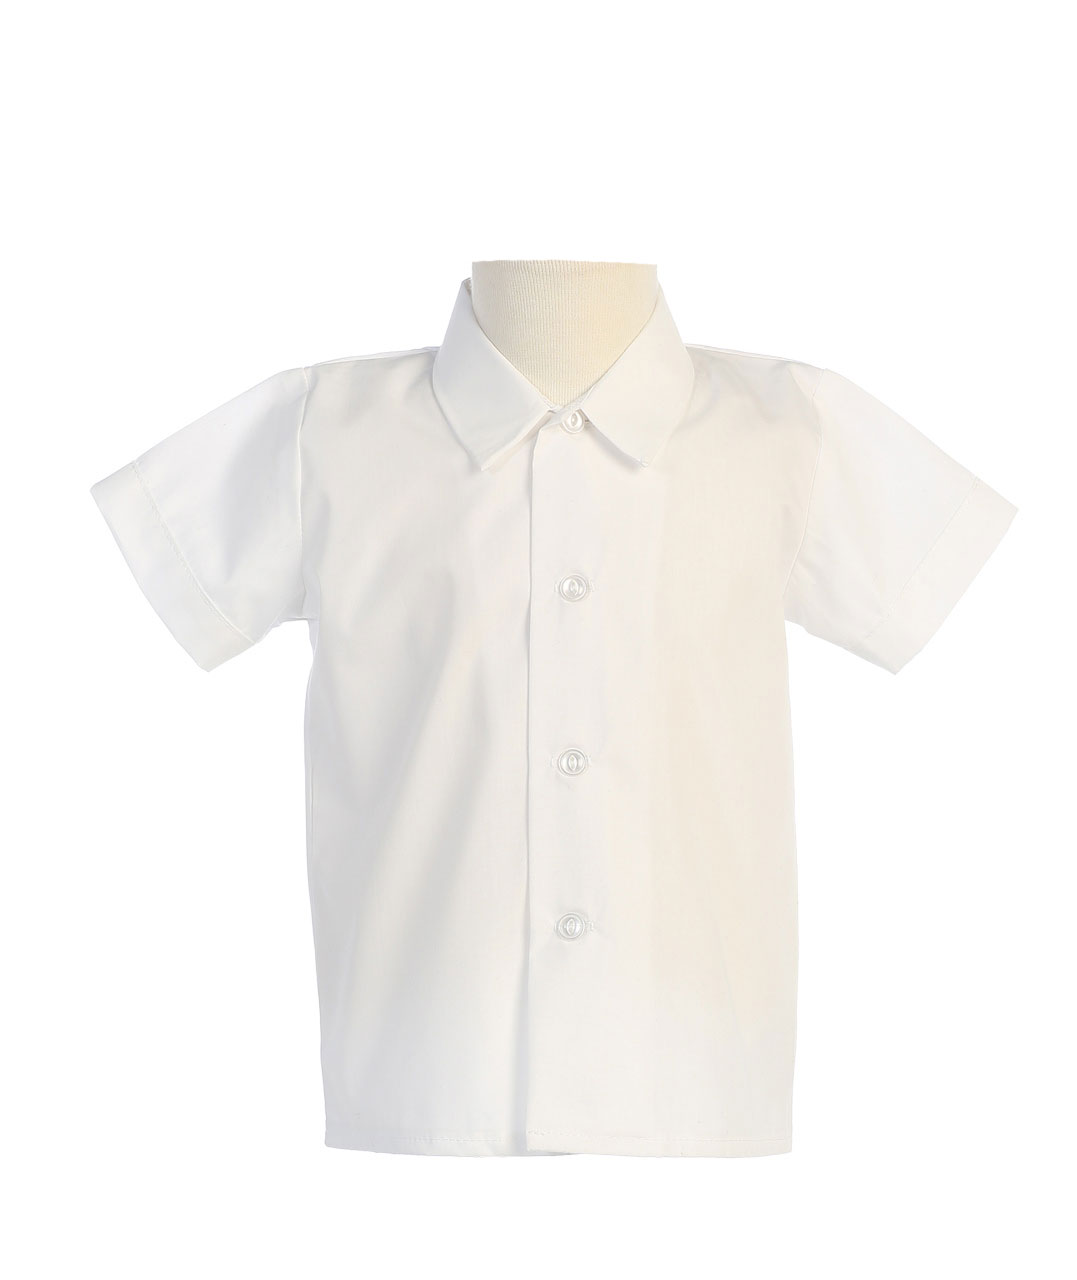 Boys Short Sleeved Simple Dress Shirt - Available in White 4T